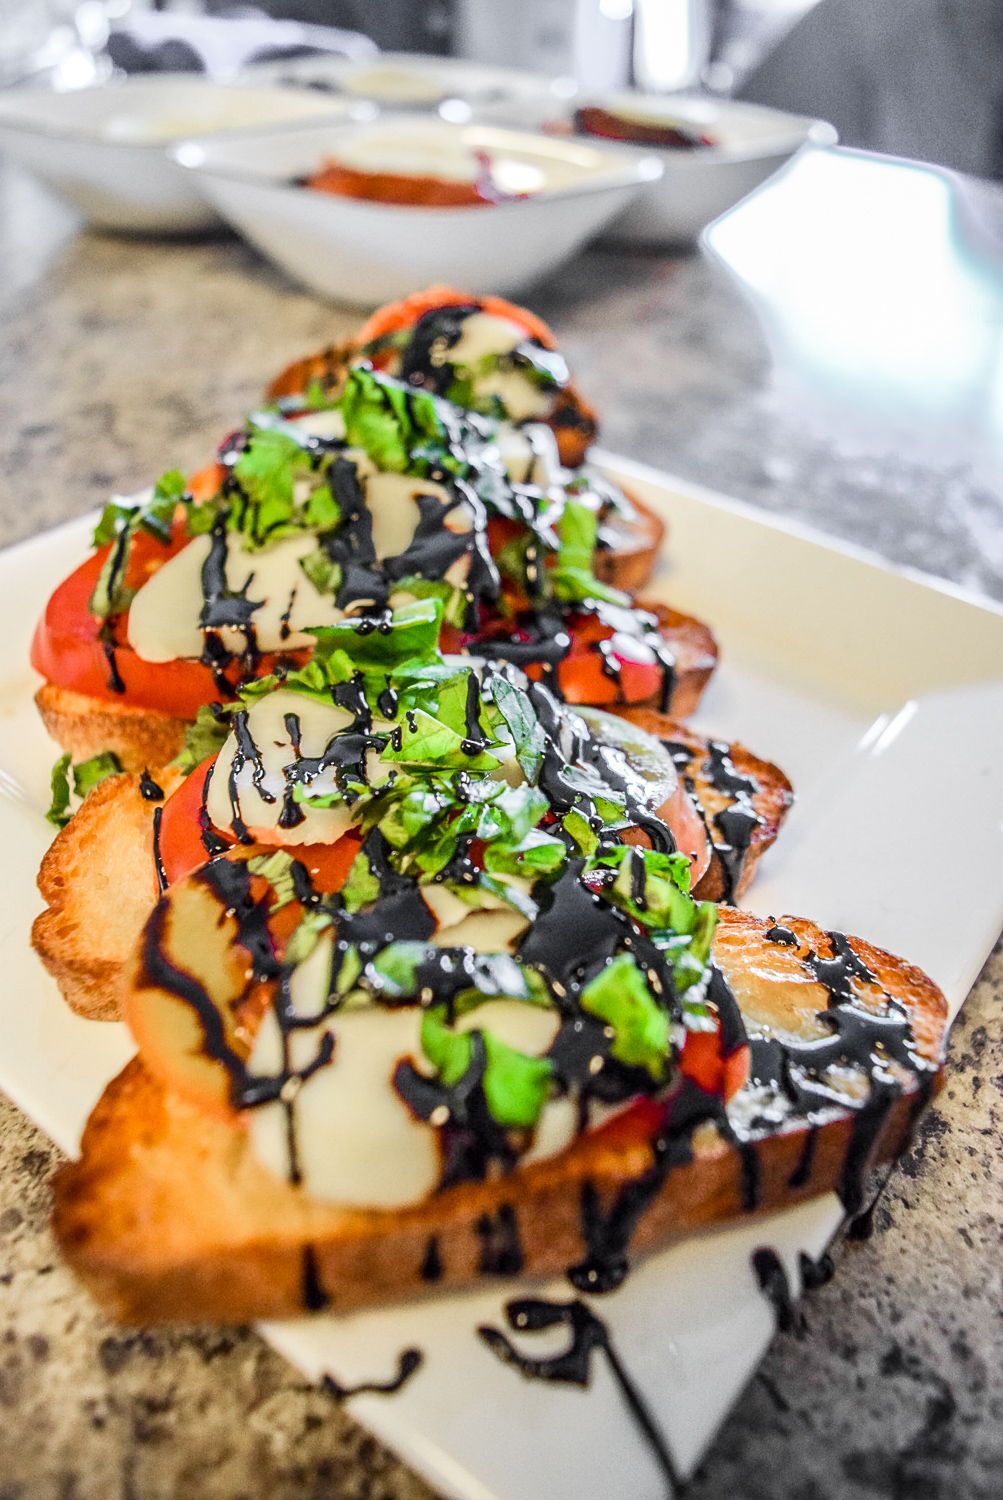 Finished caprese bruschetta with heirloom tomato, fresh basil, homemade mozzerella, and balsamic reduction from angle